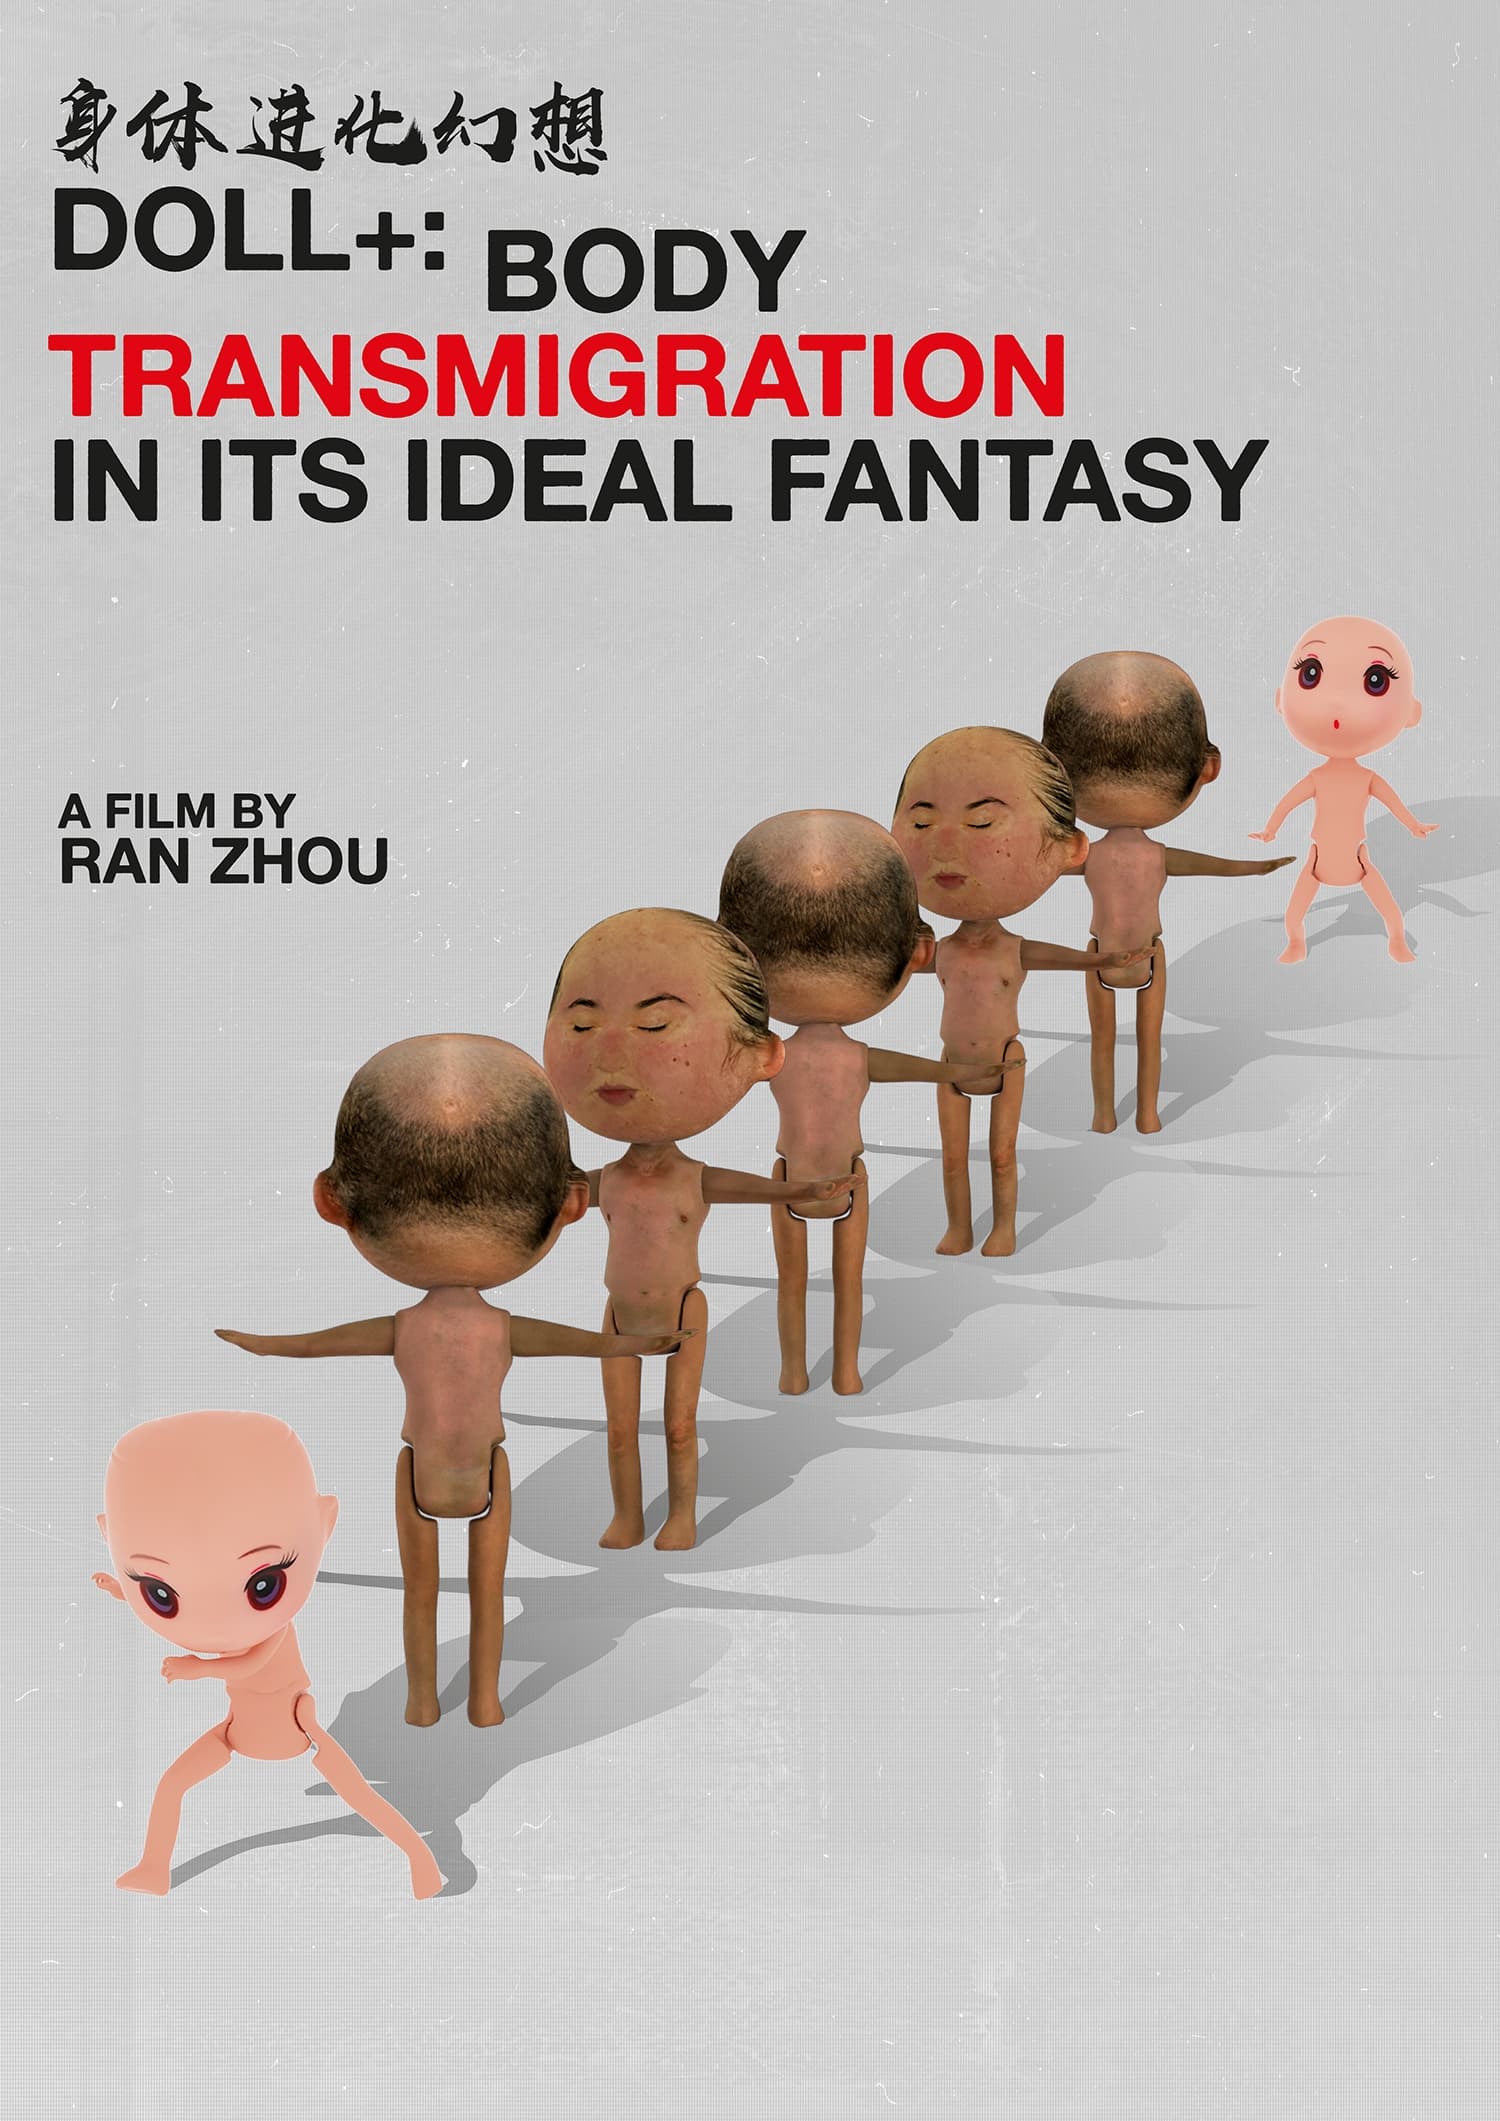 Doll+: Body Transmigration in its Ideal Fantasy